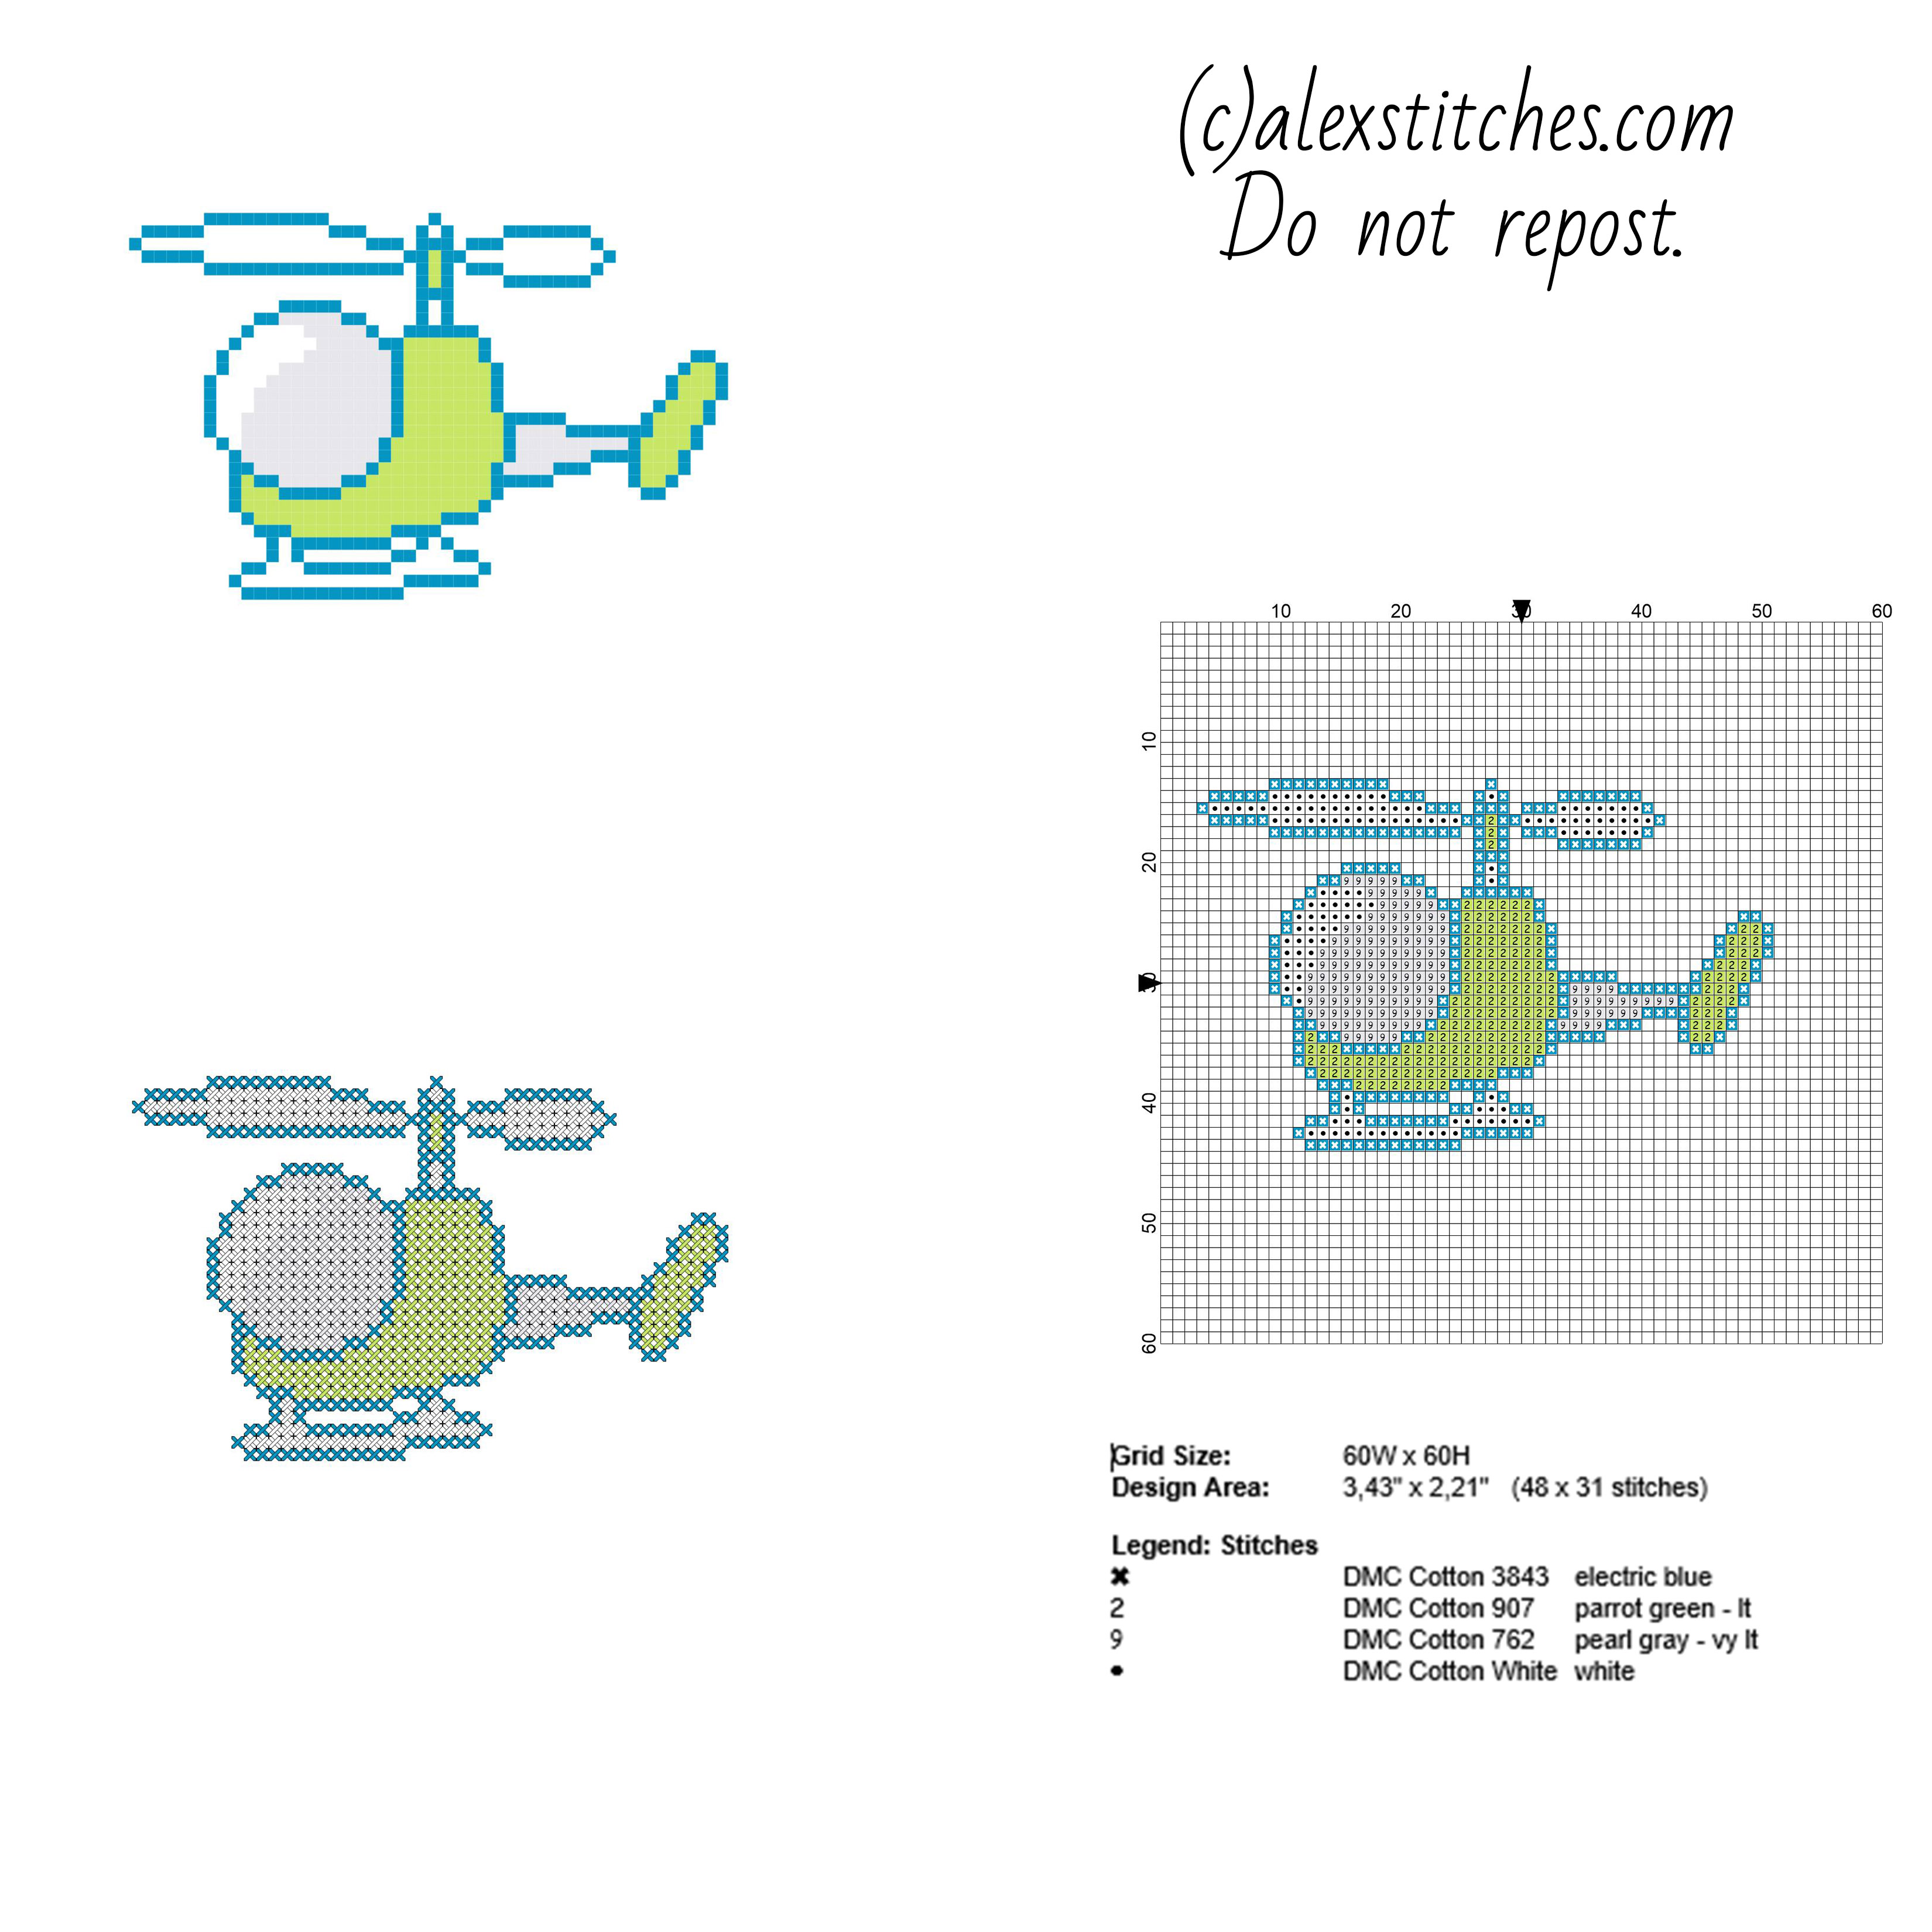 Colored green toy helicopter free and small cross stitch pattern 48 x 31 stitches 4 DMC threads